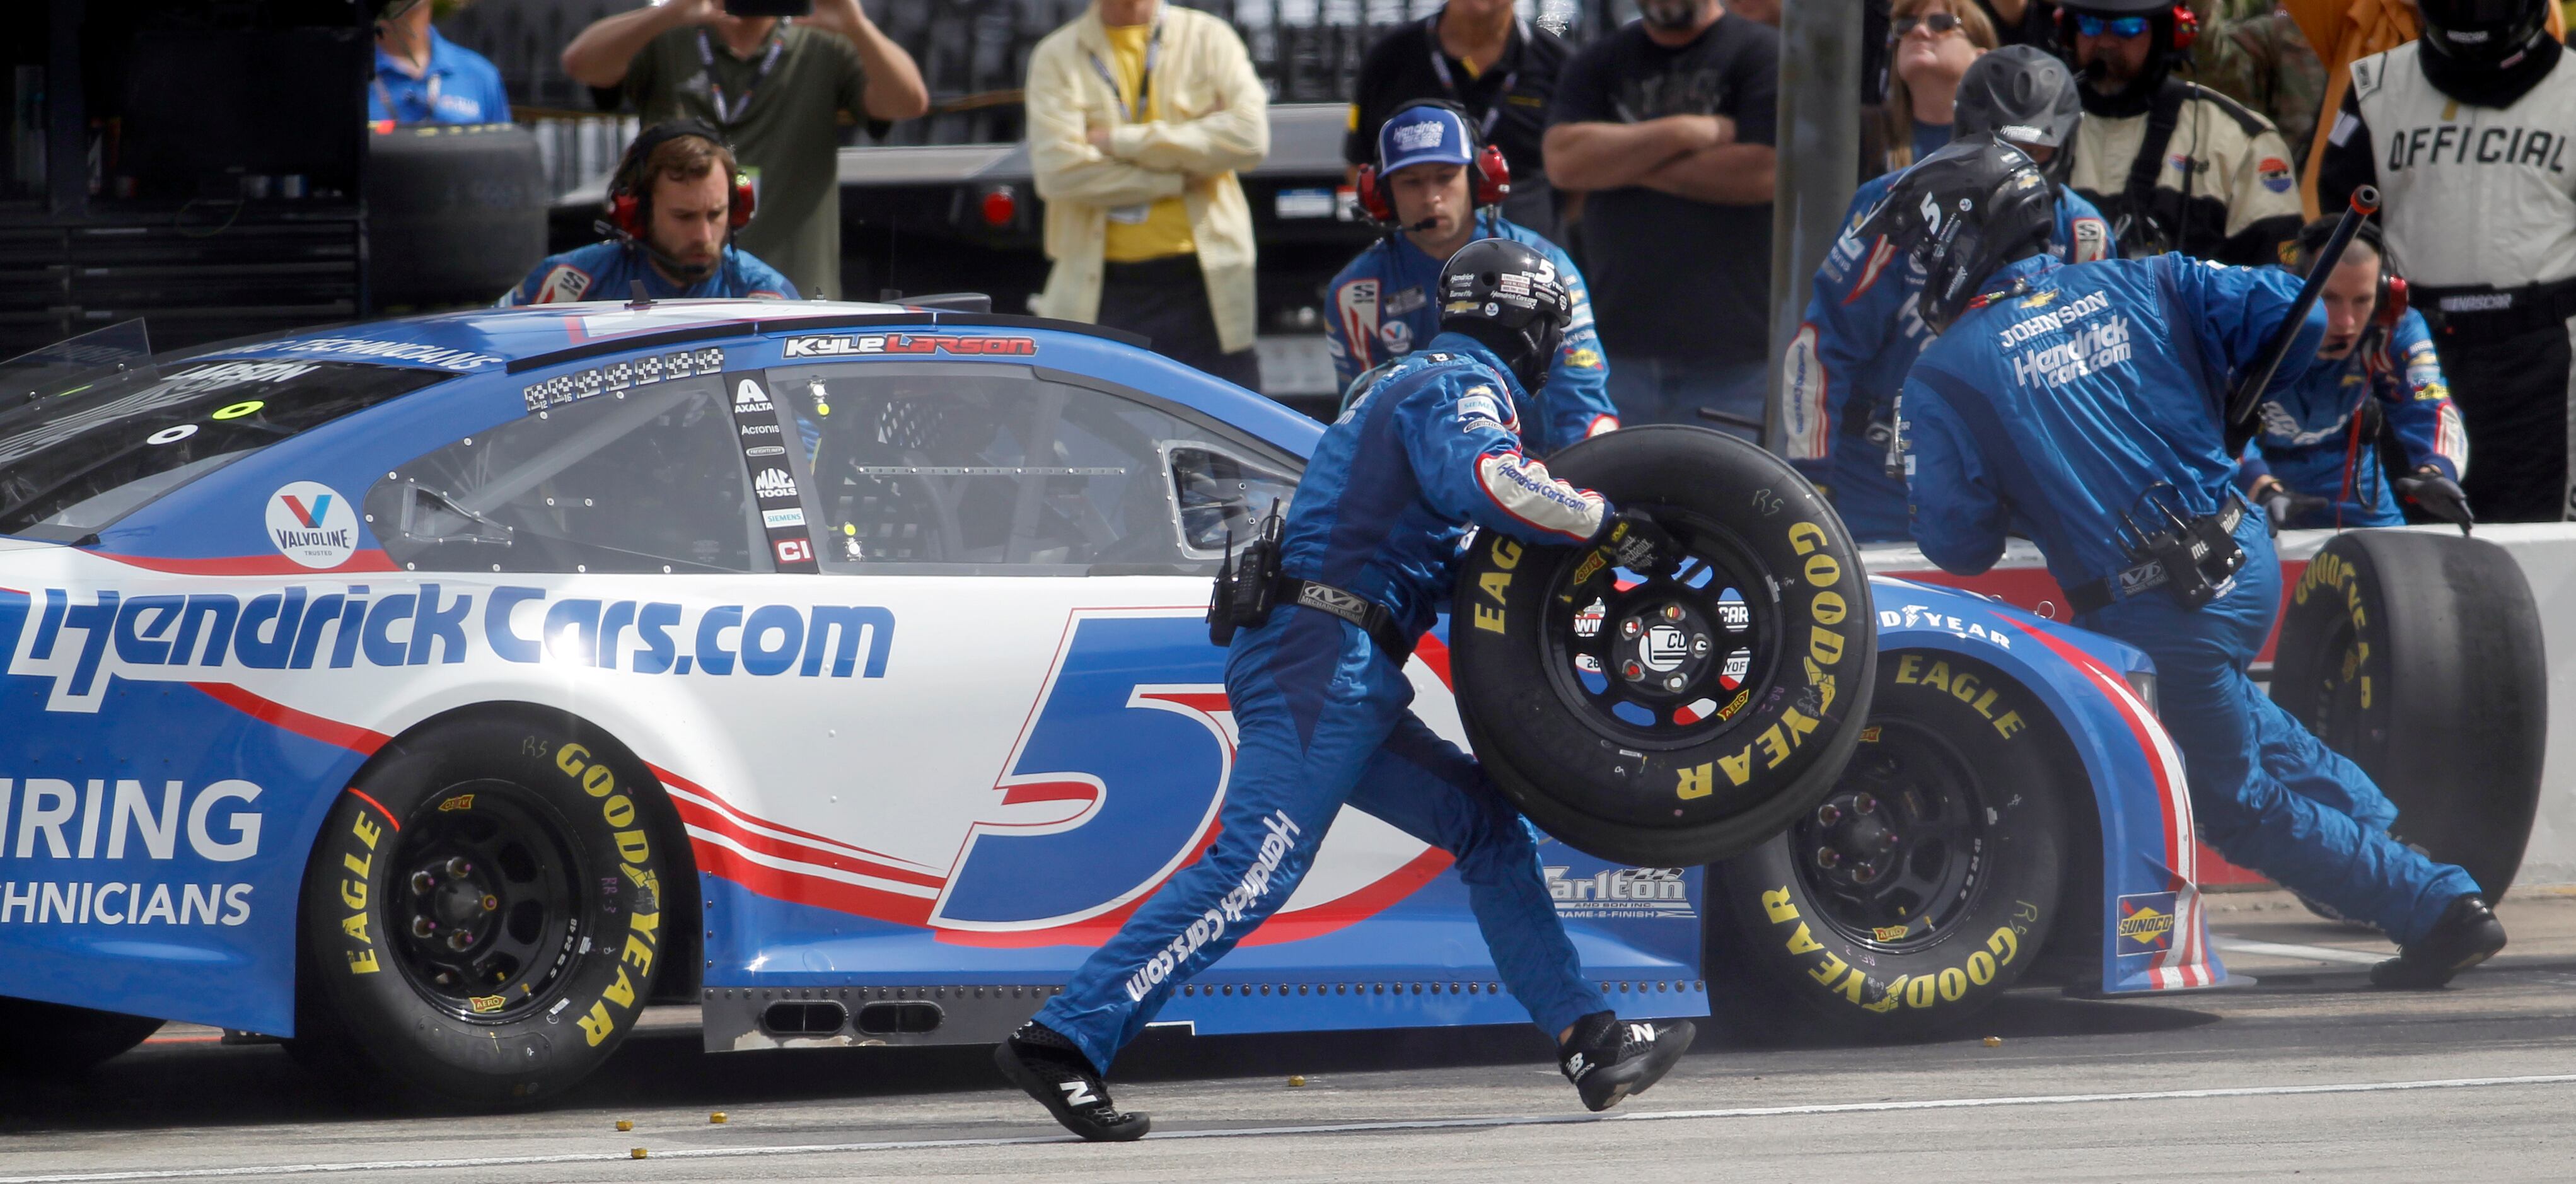 Driver Kyle Larson waits in a pit stop during the 2nd stage of the race as his pit crew...